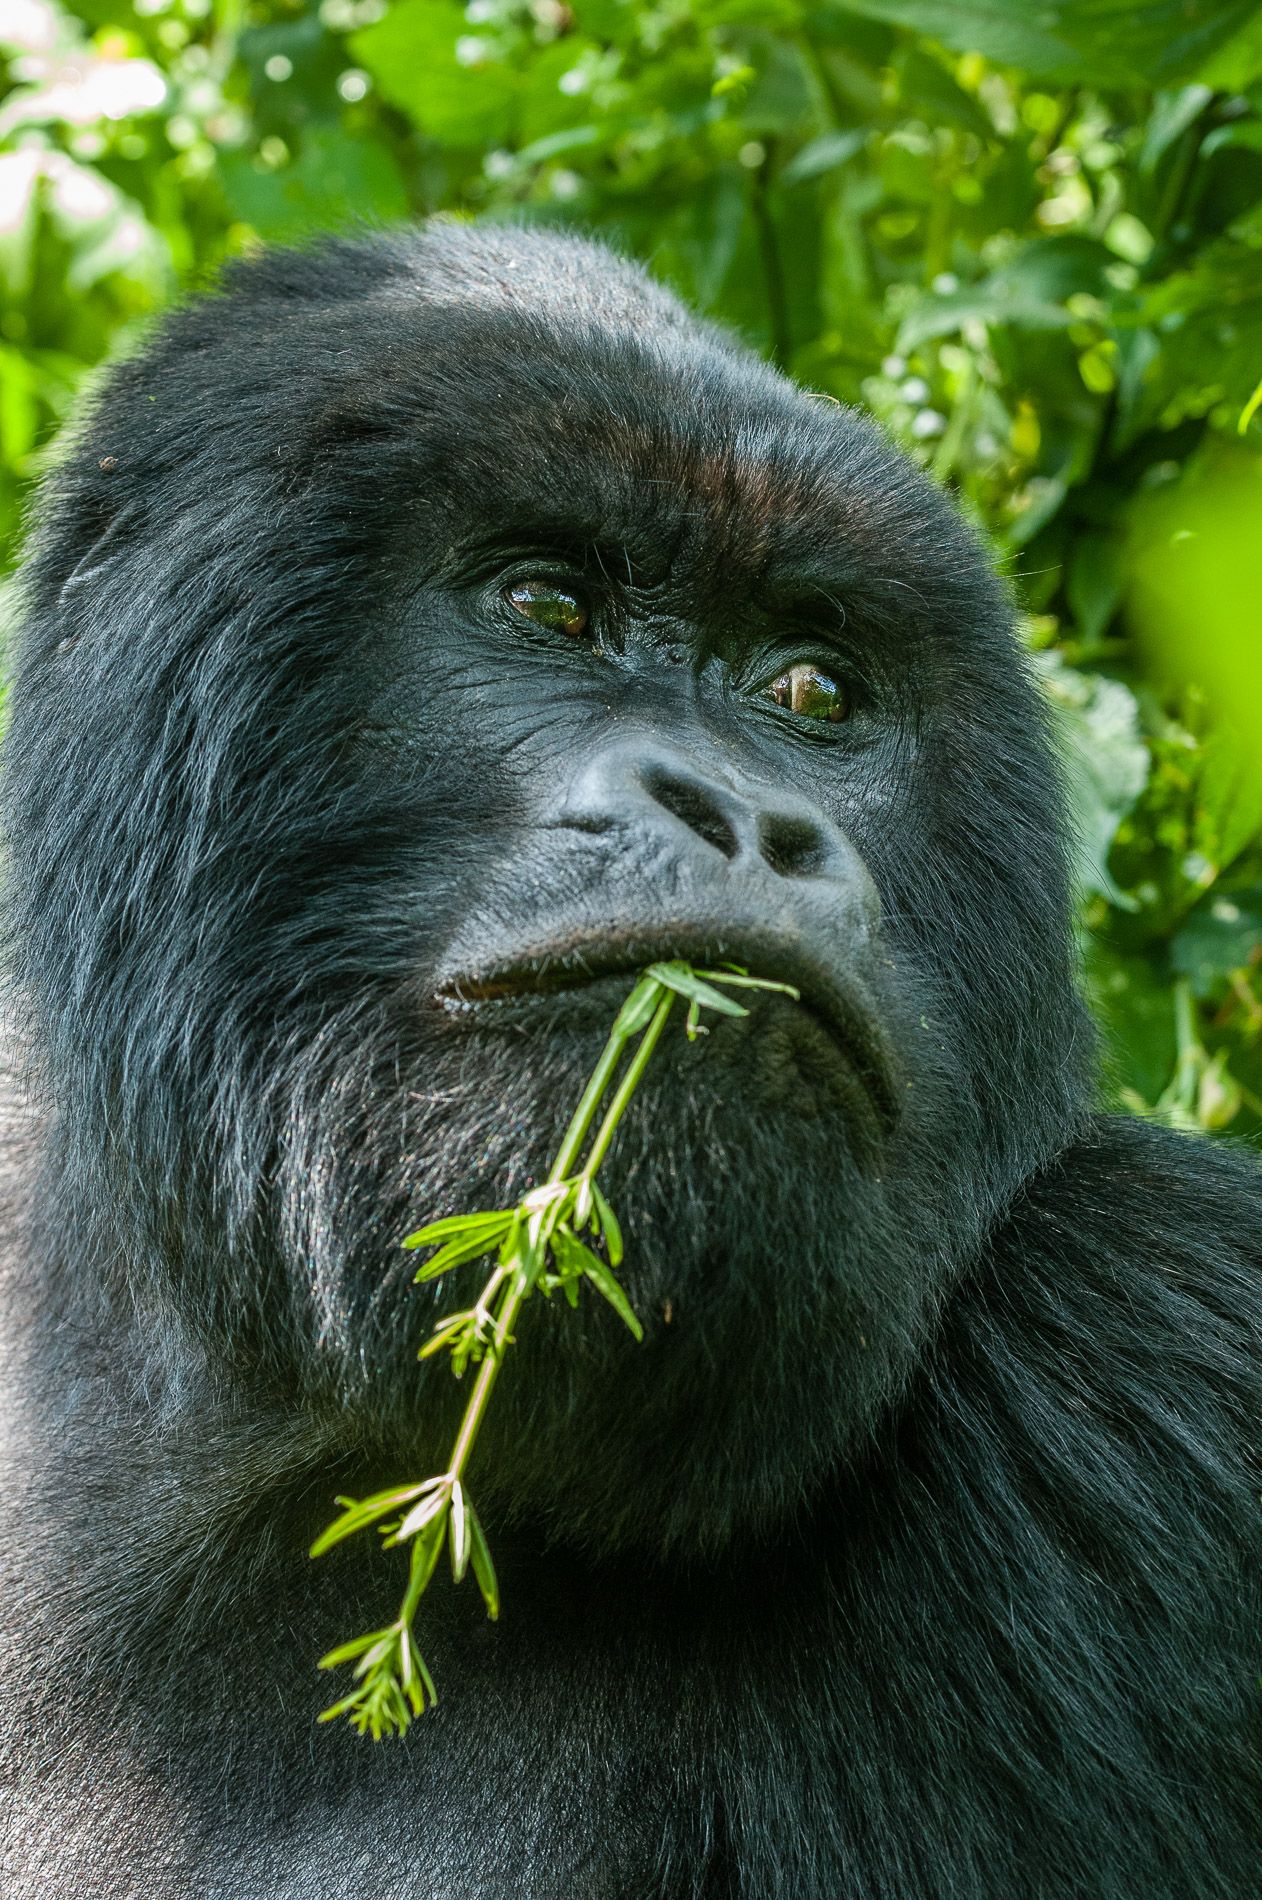 Mountain gorillas are endangered. There remain only 700 in the world, threatened by war, poaching and deforestation. Virunga National Park, Congo.